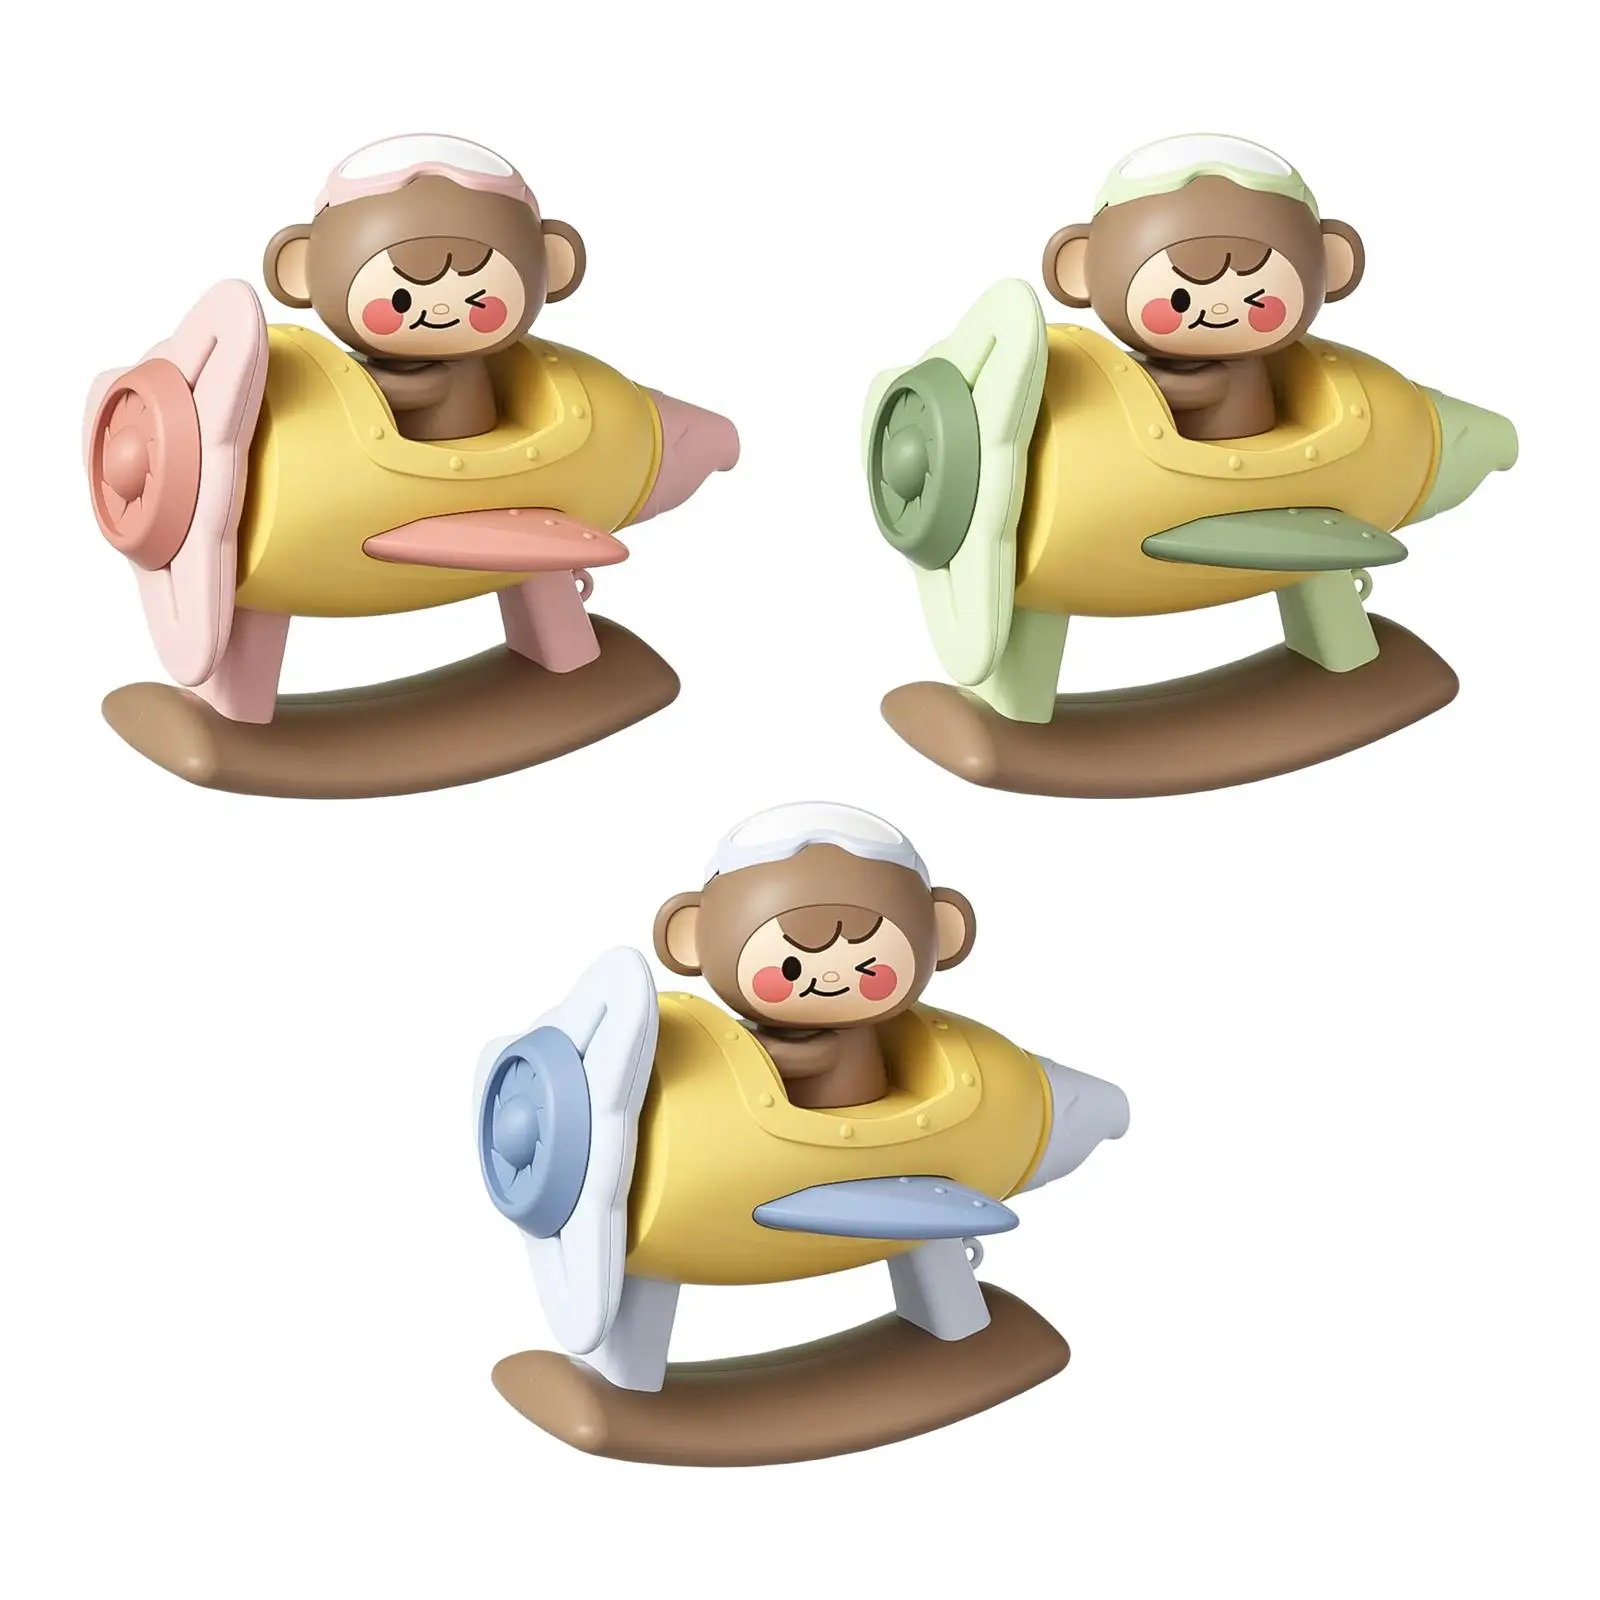 

Whistles toy toddler Adorable Monkey Sitting On The Plane Bath Toy Movable Noisemaker Toys for Decorations Desk Ornament Gifts